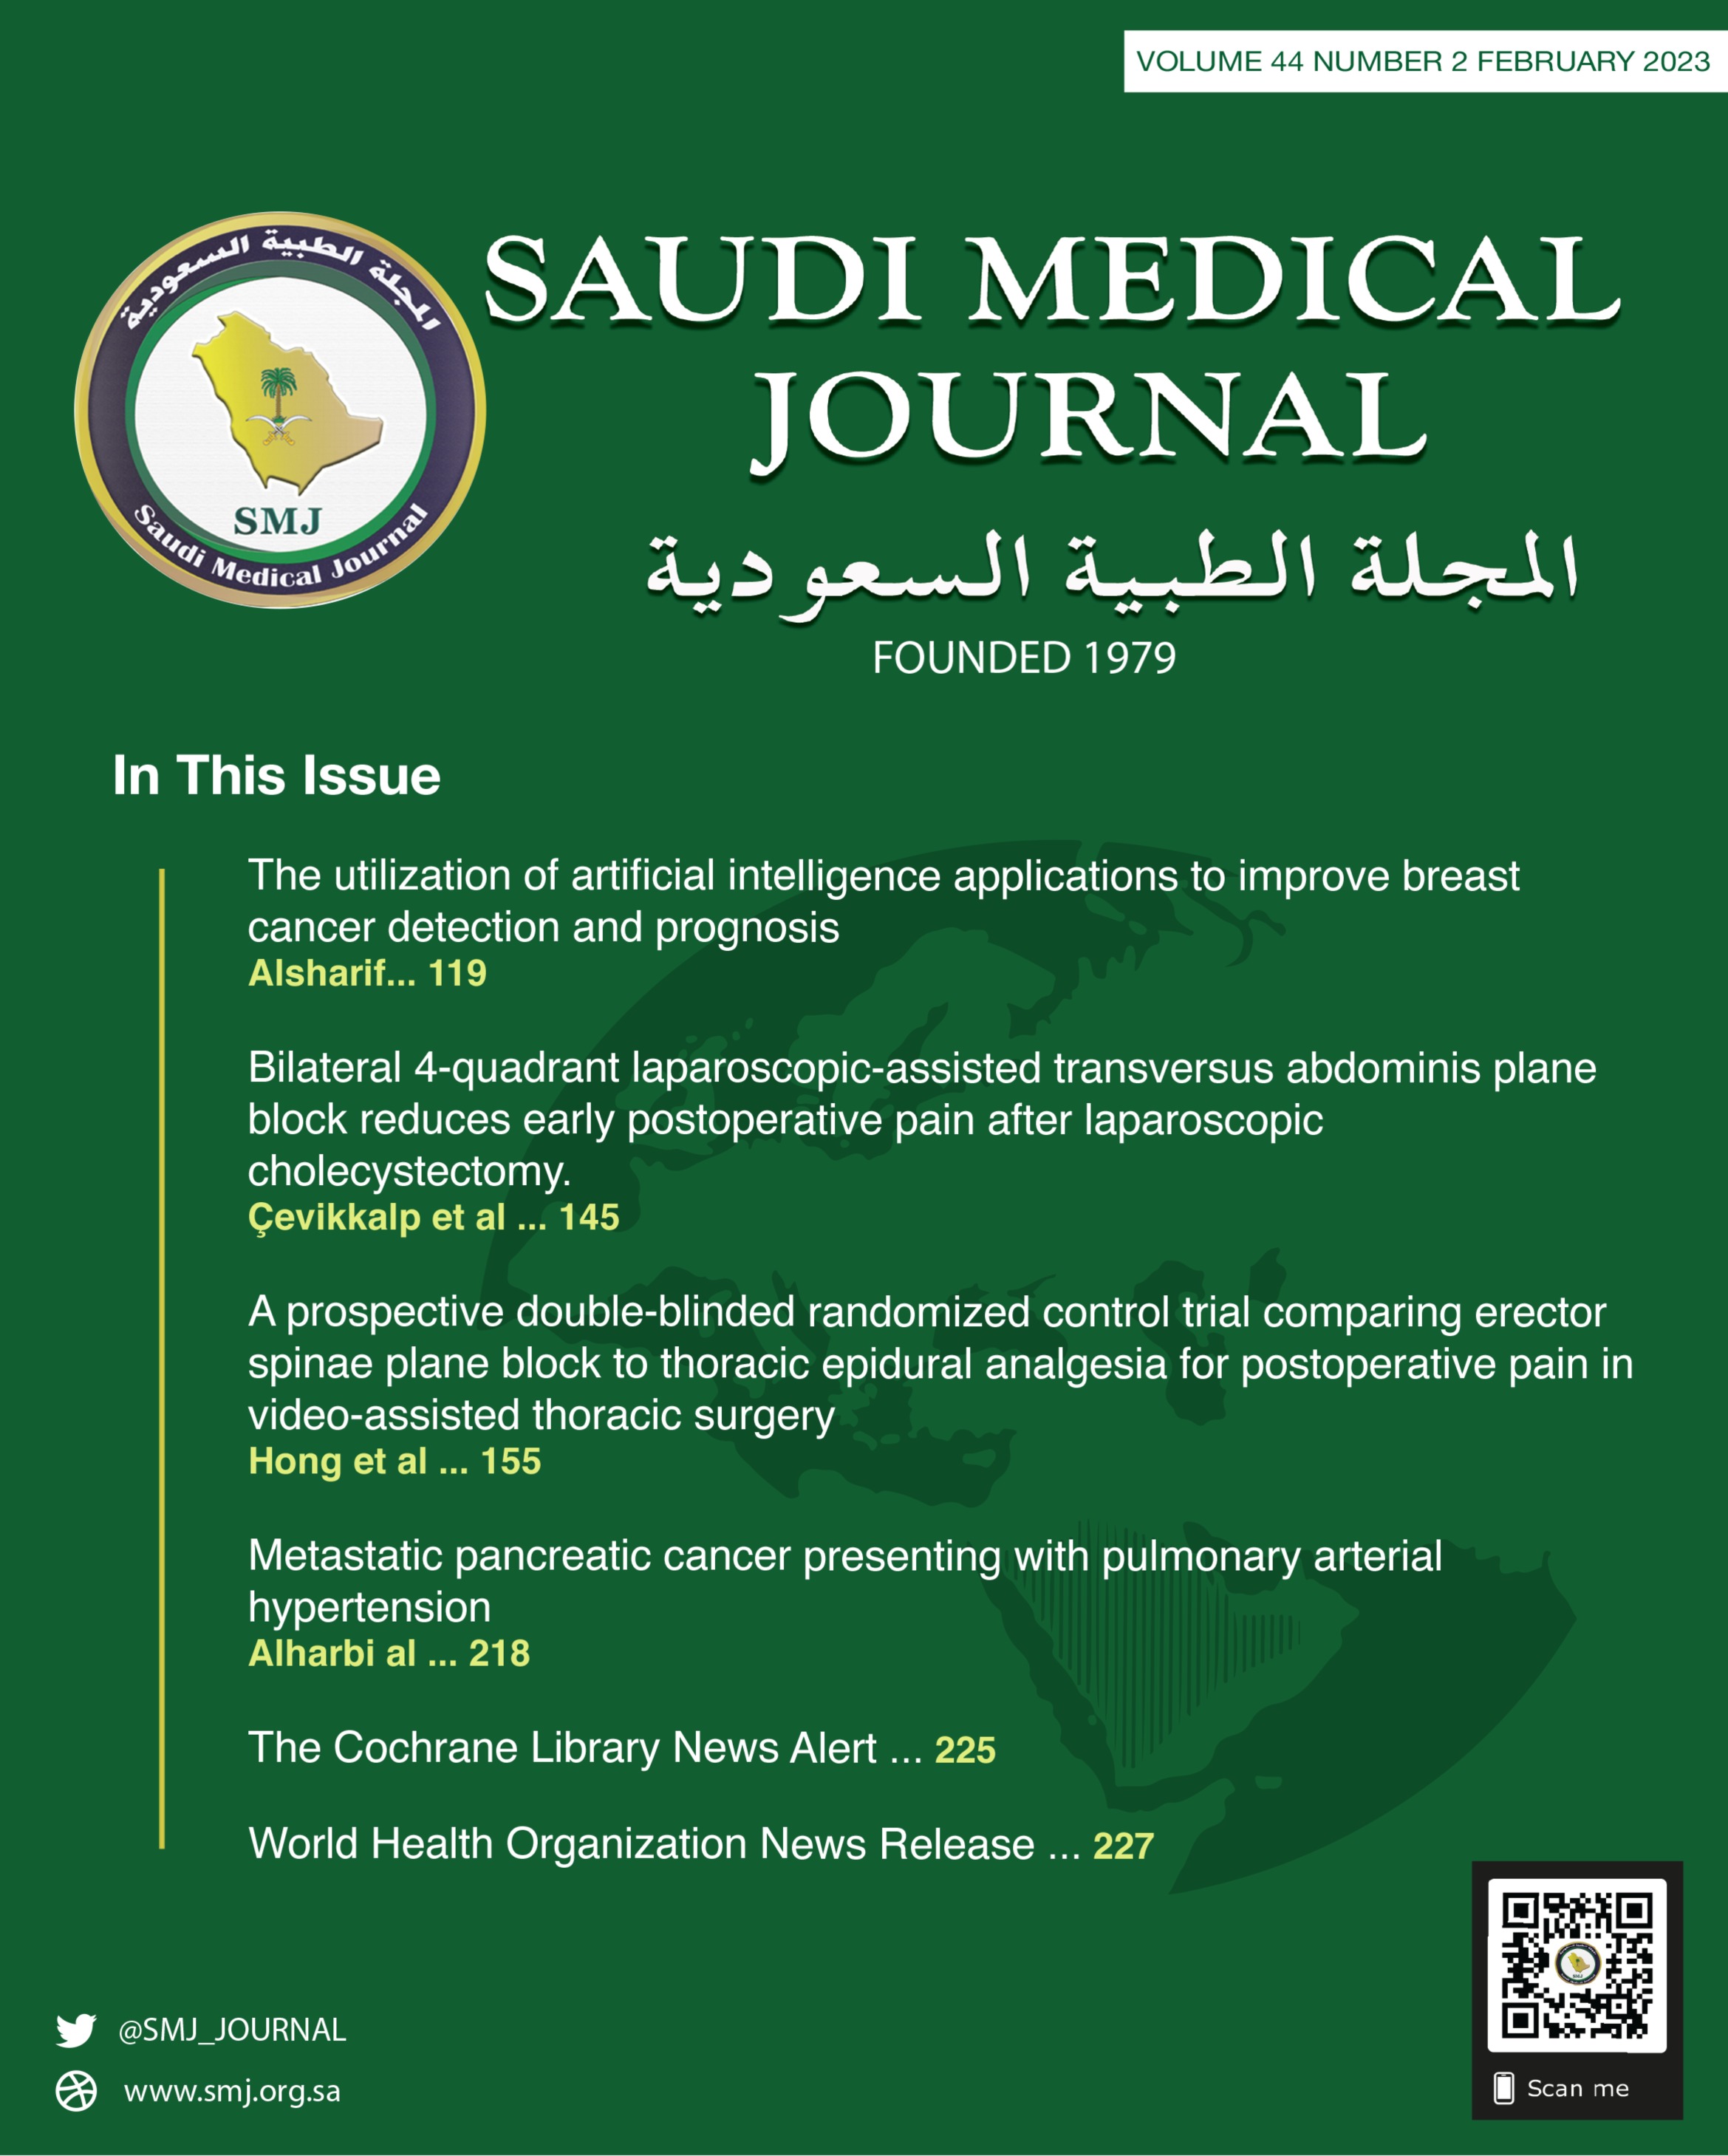 Prevalence of microvascular complications among patients with type 2 diabetes mellitus who visited diabetes clinics in Saudi Arabia